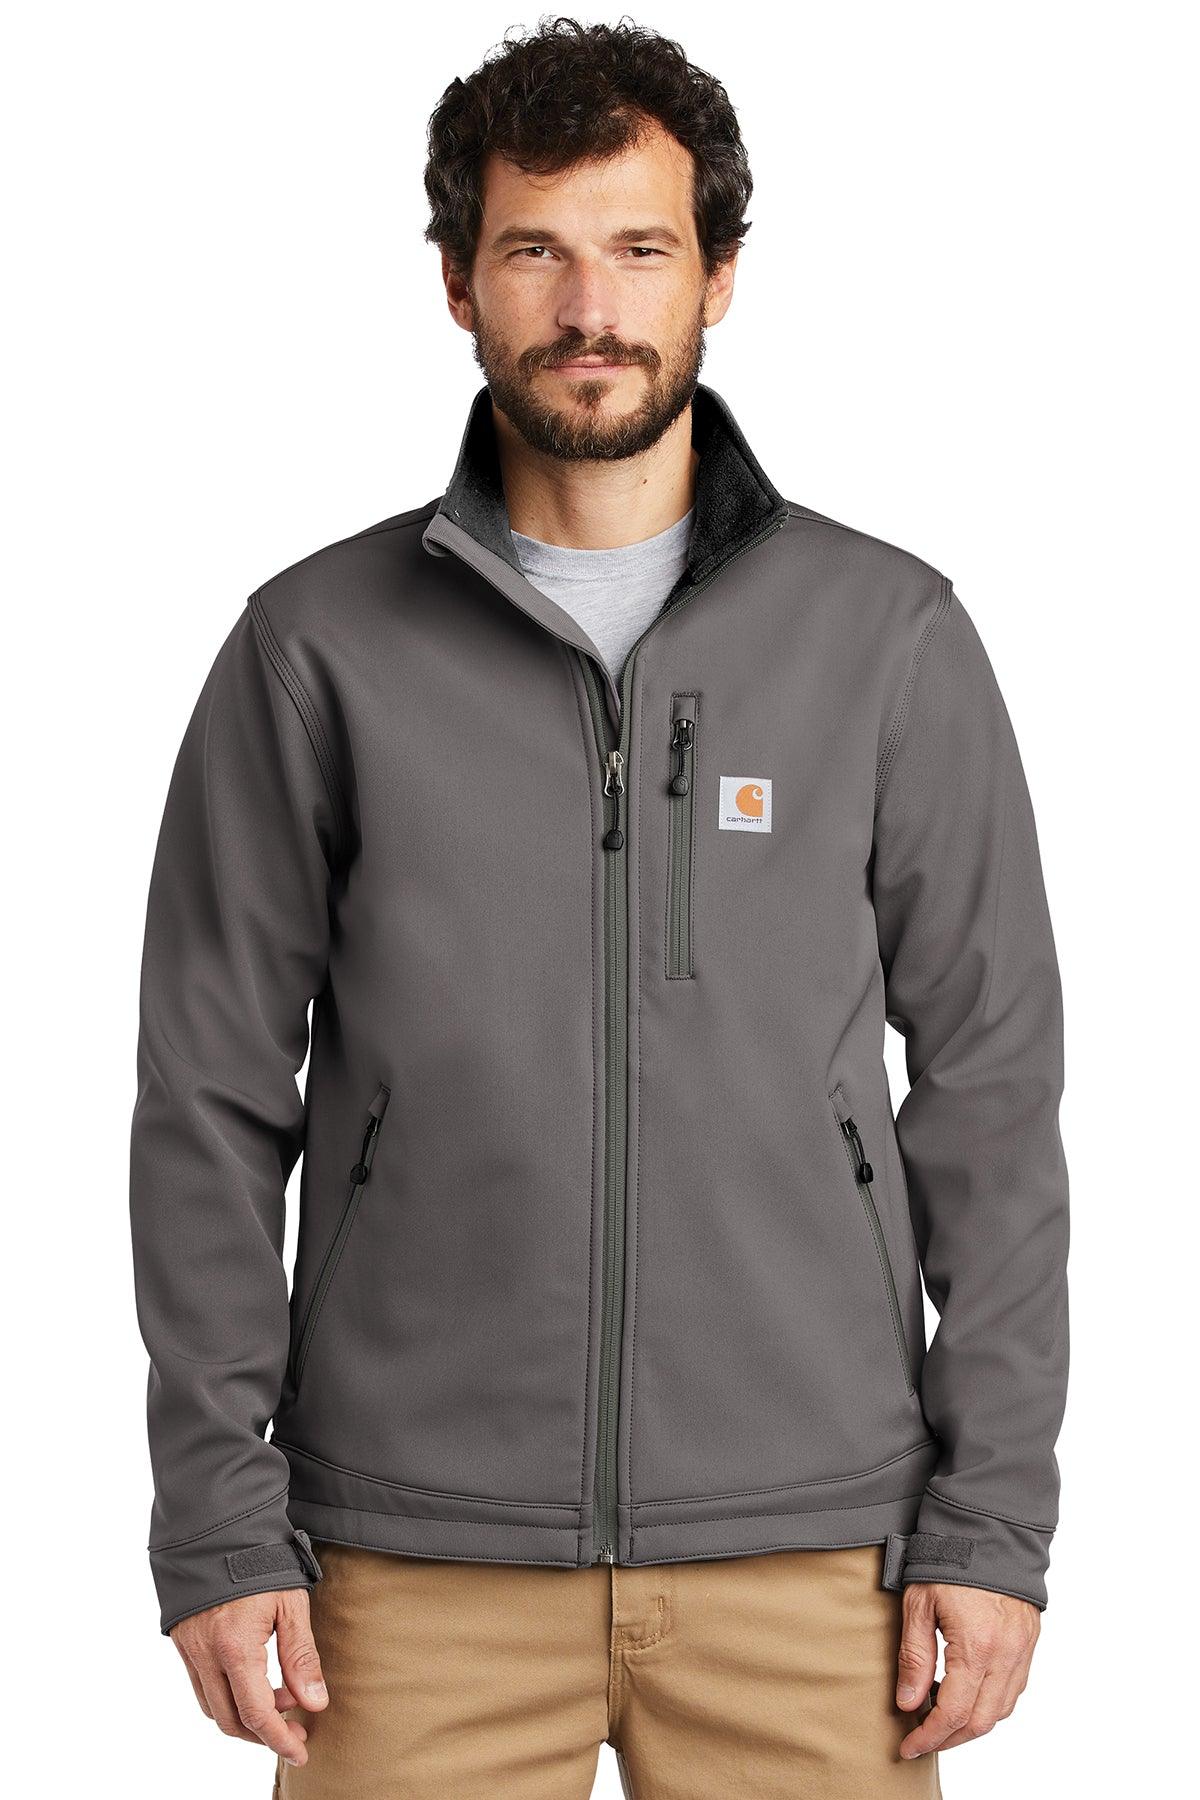 Crowley Soft Shell Jacket - Charcoal